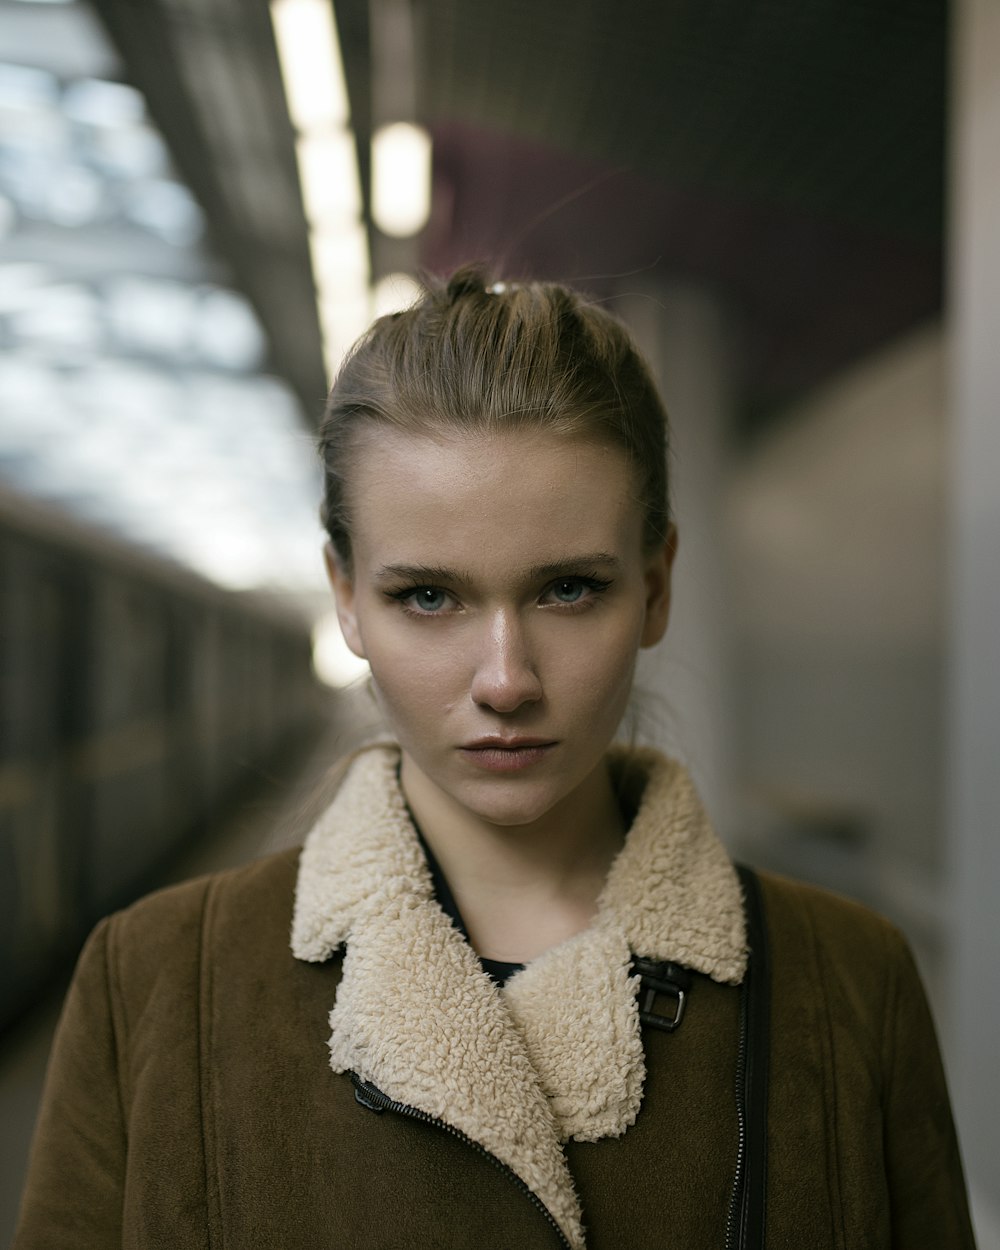 woman wearing brown and white jacket